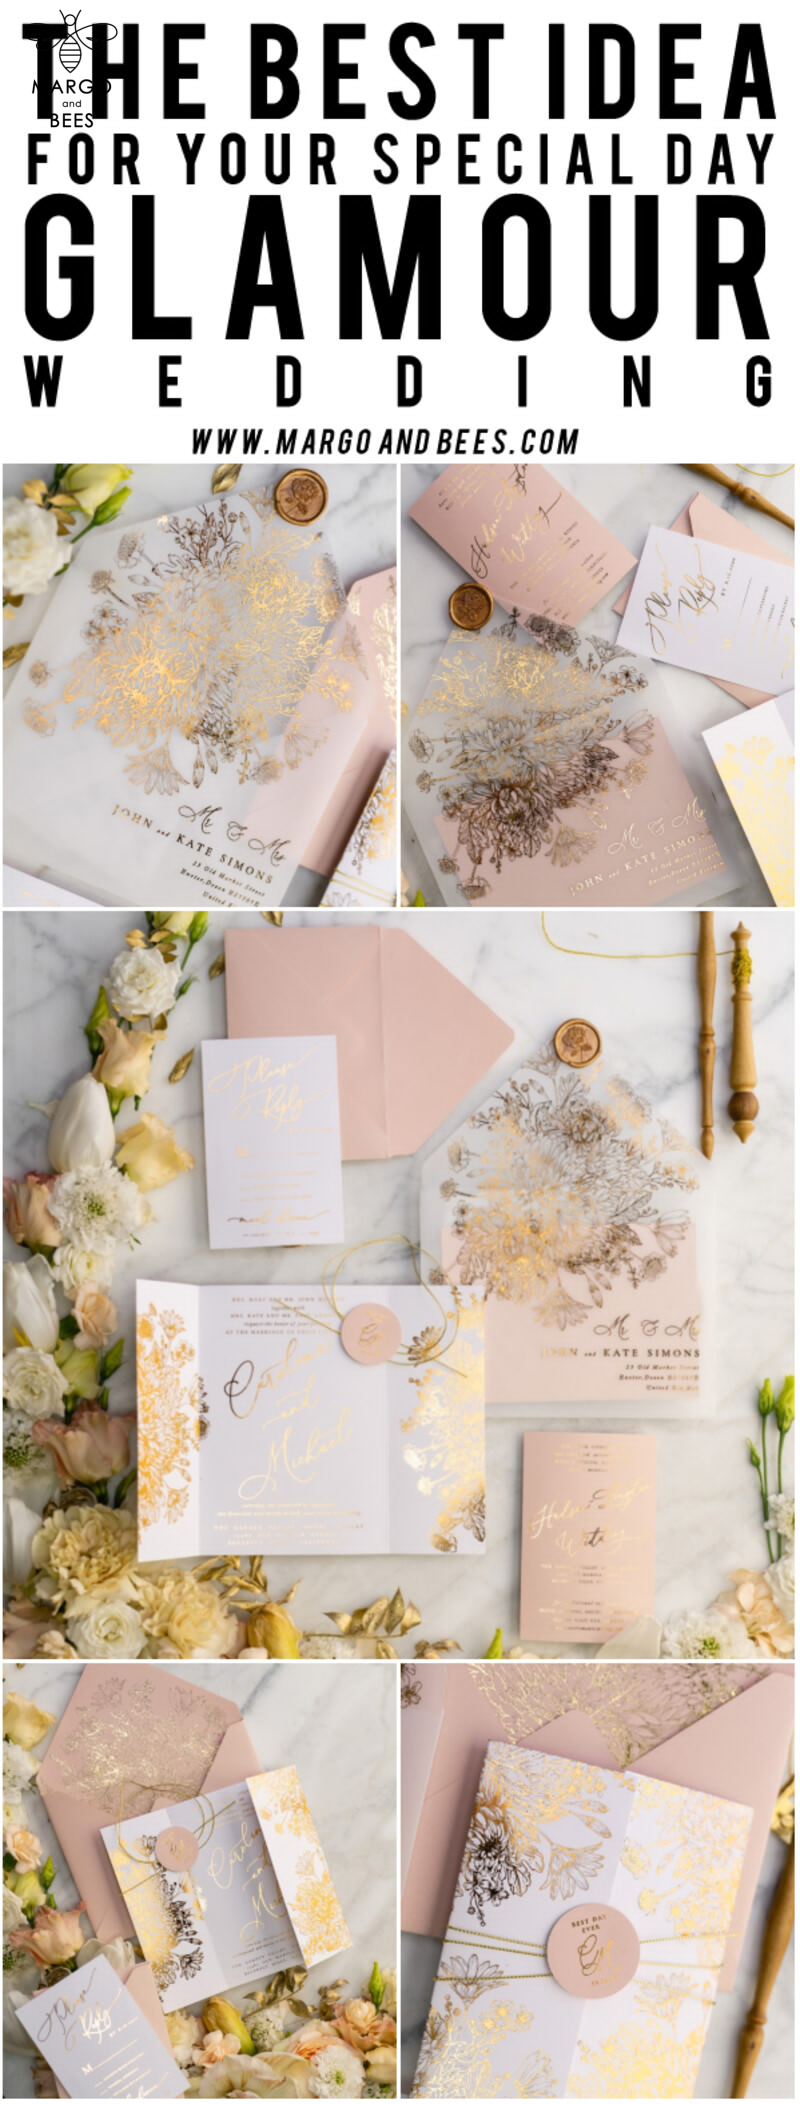 Elegant Arabic Golden Wedding Invitations with Glamour Gold Foil and Romantic Blush Pink, Exquisite Bespoke Indian Wedding Stationery-42